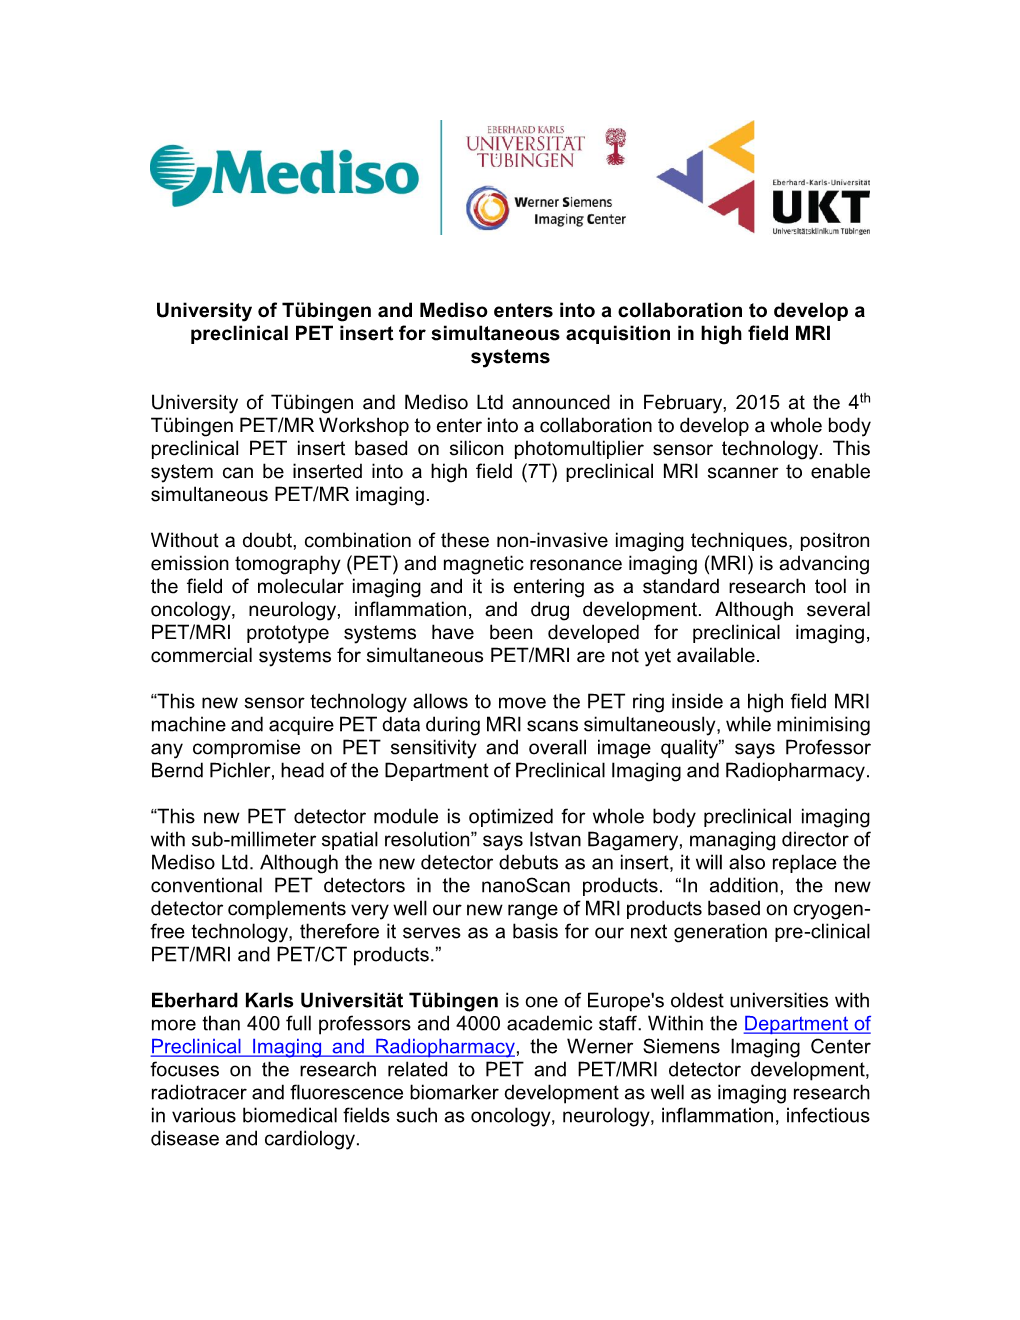 University of Tübingen and Mediso Enters Into a Collaboration to Develop a Preclinical PET Insert for Simultaneous Acquisition in High Field MRI Systems